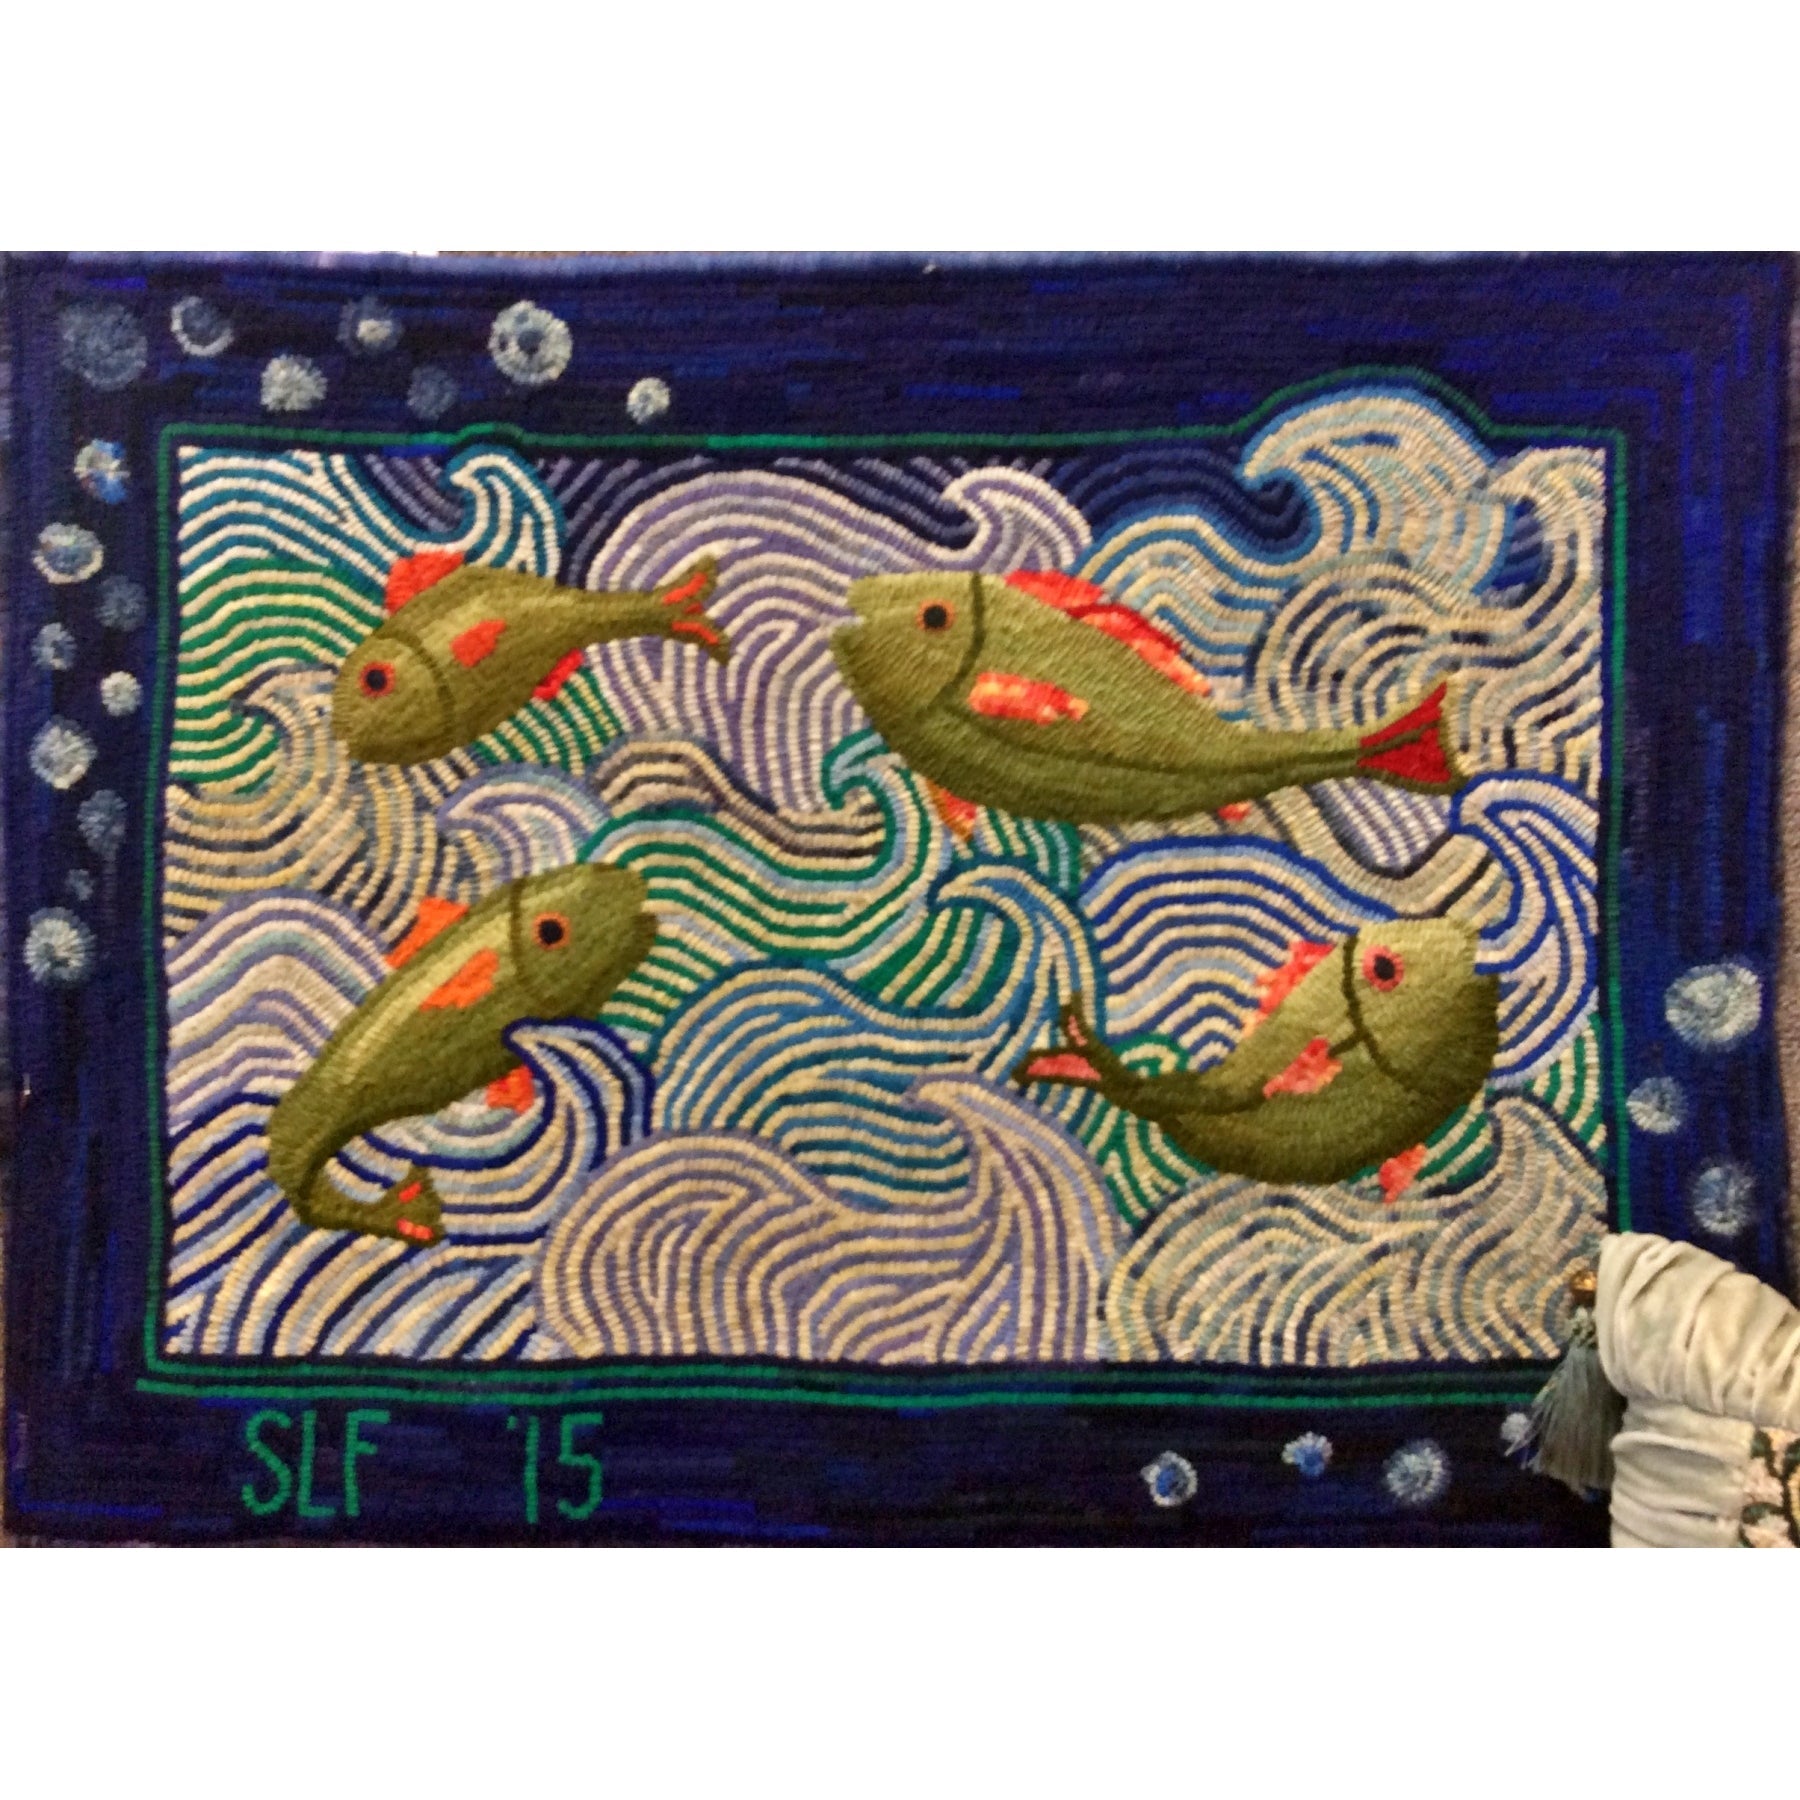 The Fish And The Wave, rug hooked by Suzanne Farrens